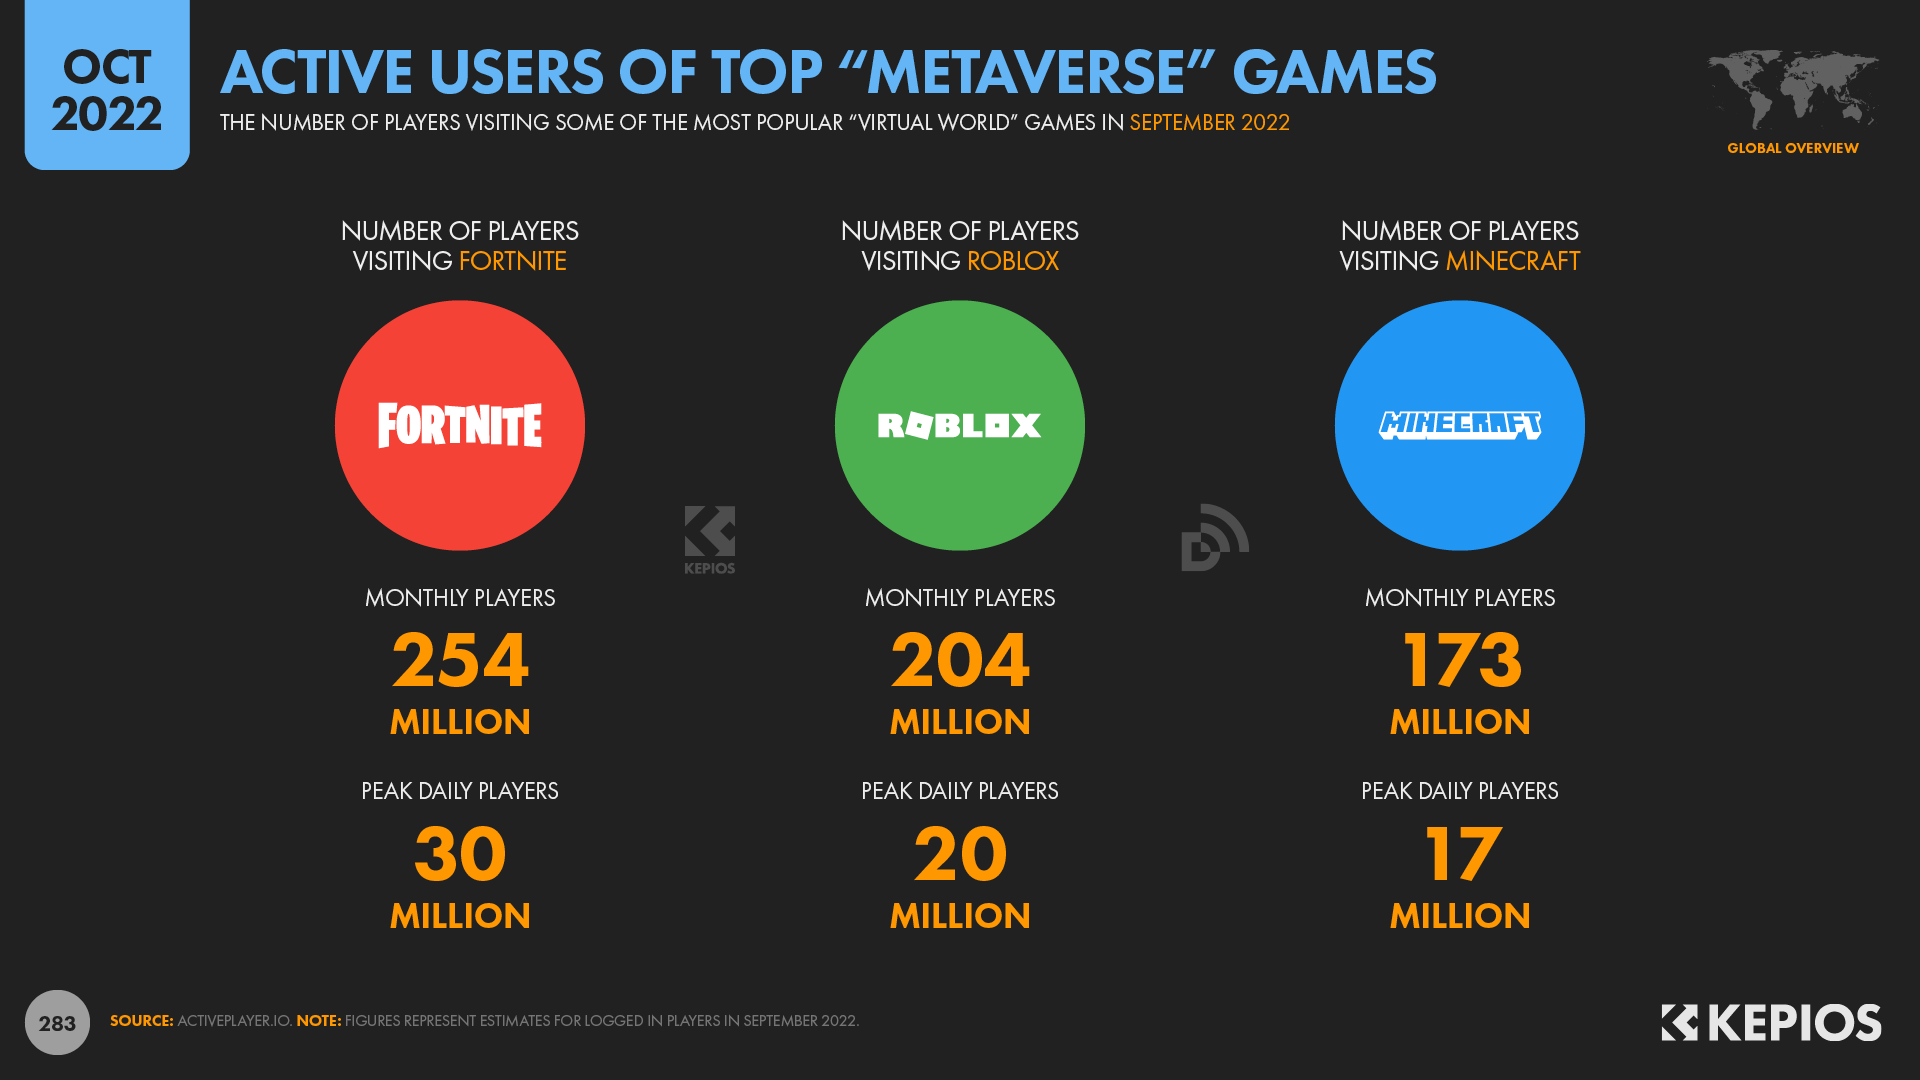 Top 50 Roblox Metaverse Brand Games Ranked by Lifetime Visits